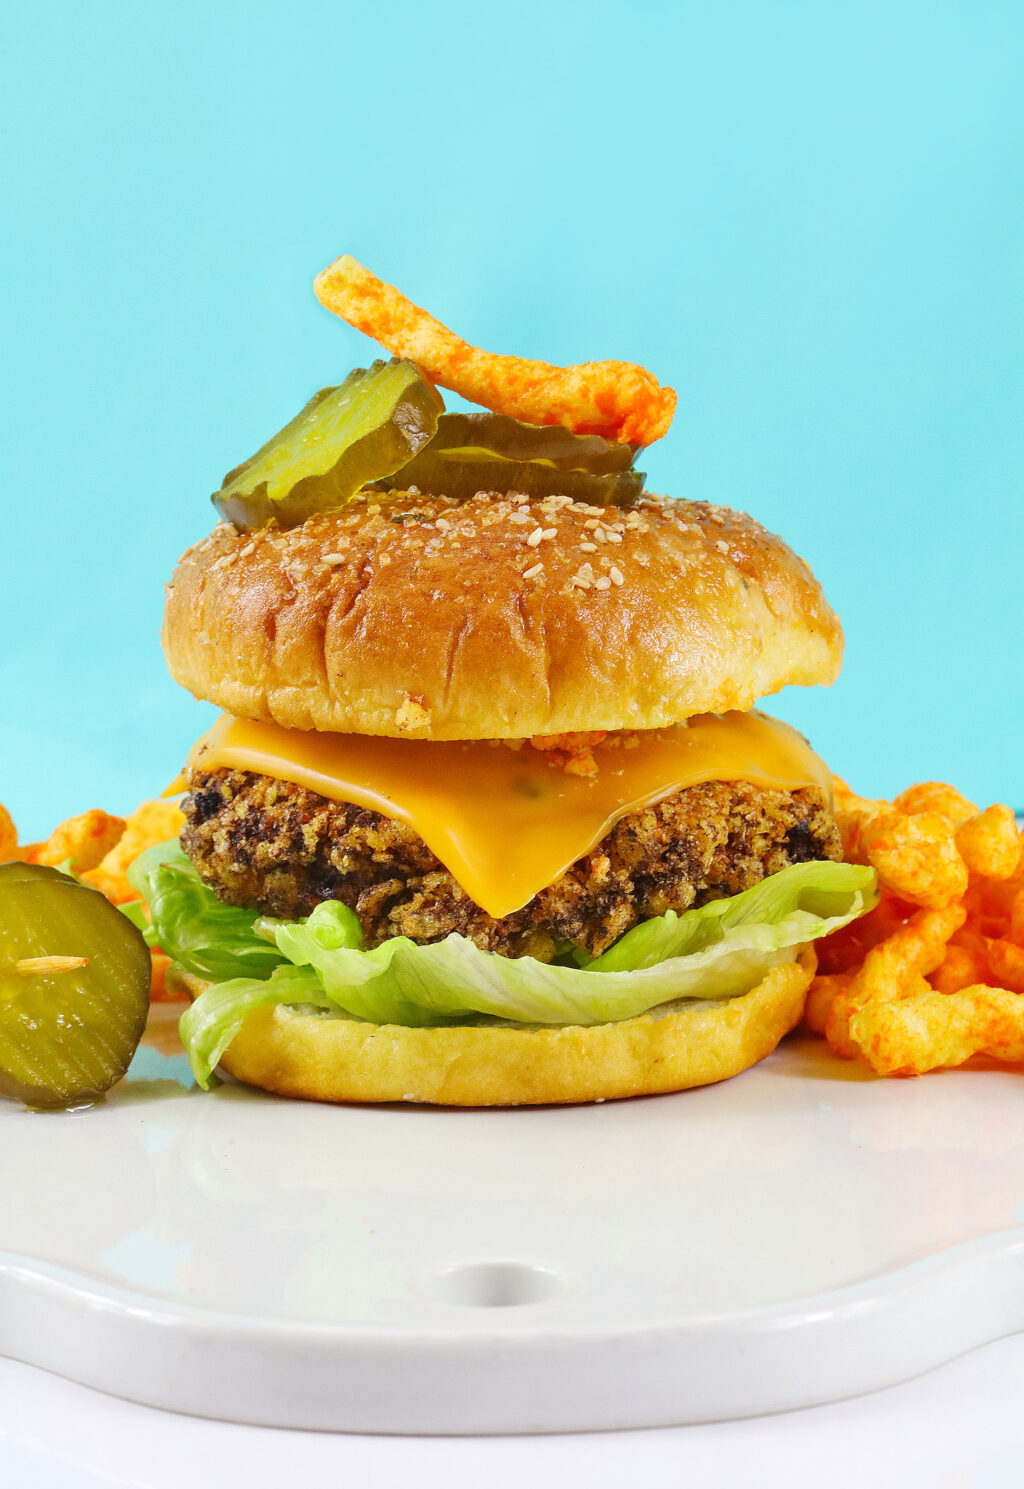 cheetos cheeseburger on table with blue background